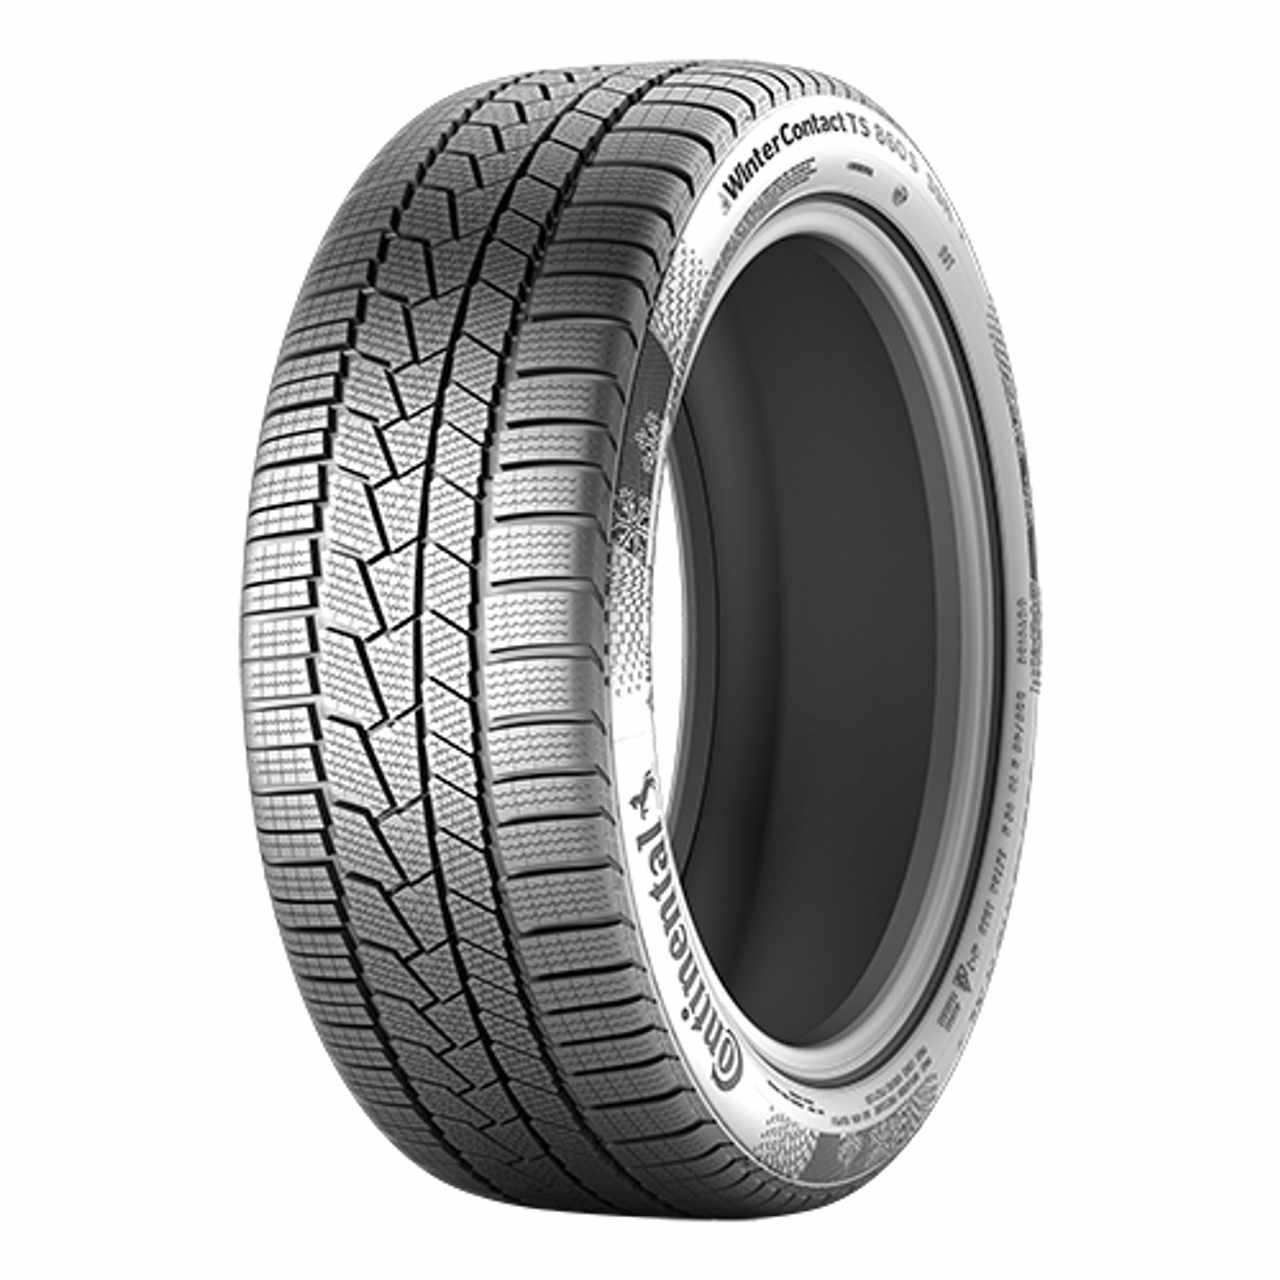 CONTINENTAL WINTERCONTACT TS 860 S 255/35R19 96V FR BSW von Continental